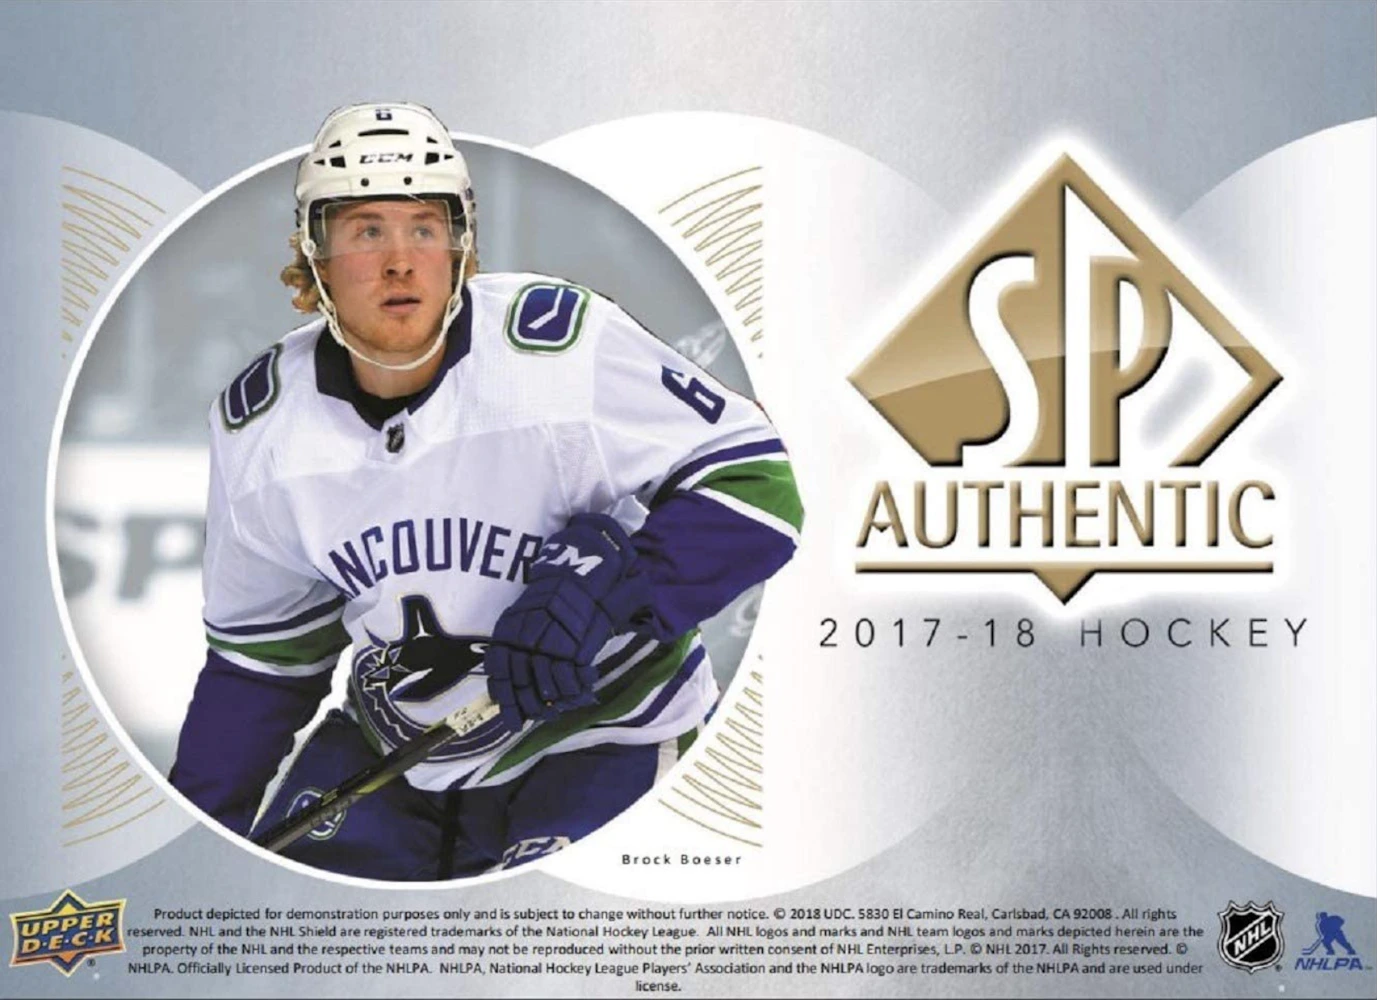 Opening 2 Boxes of 2021-22 SP Authentic Hockey Hobby 